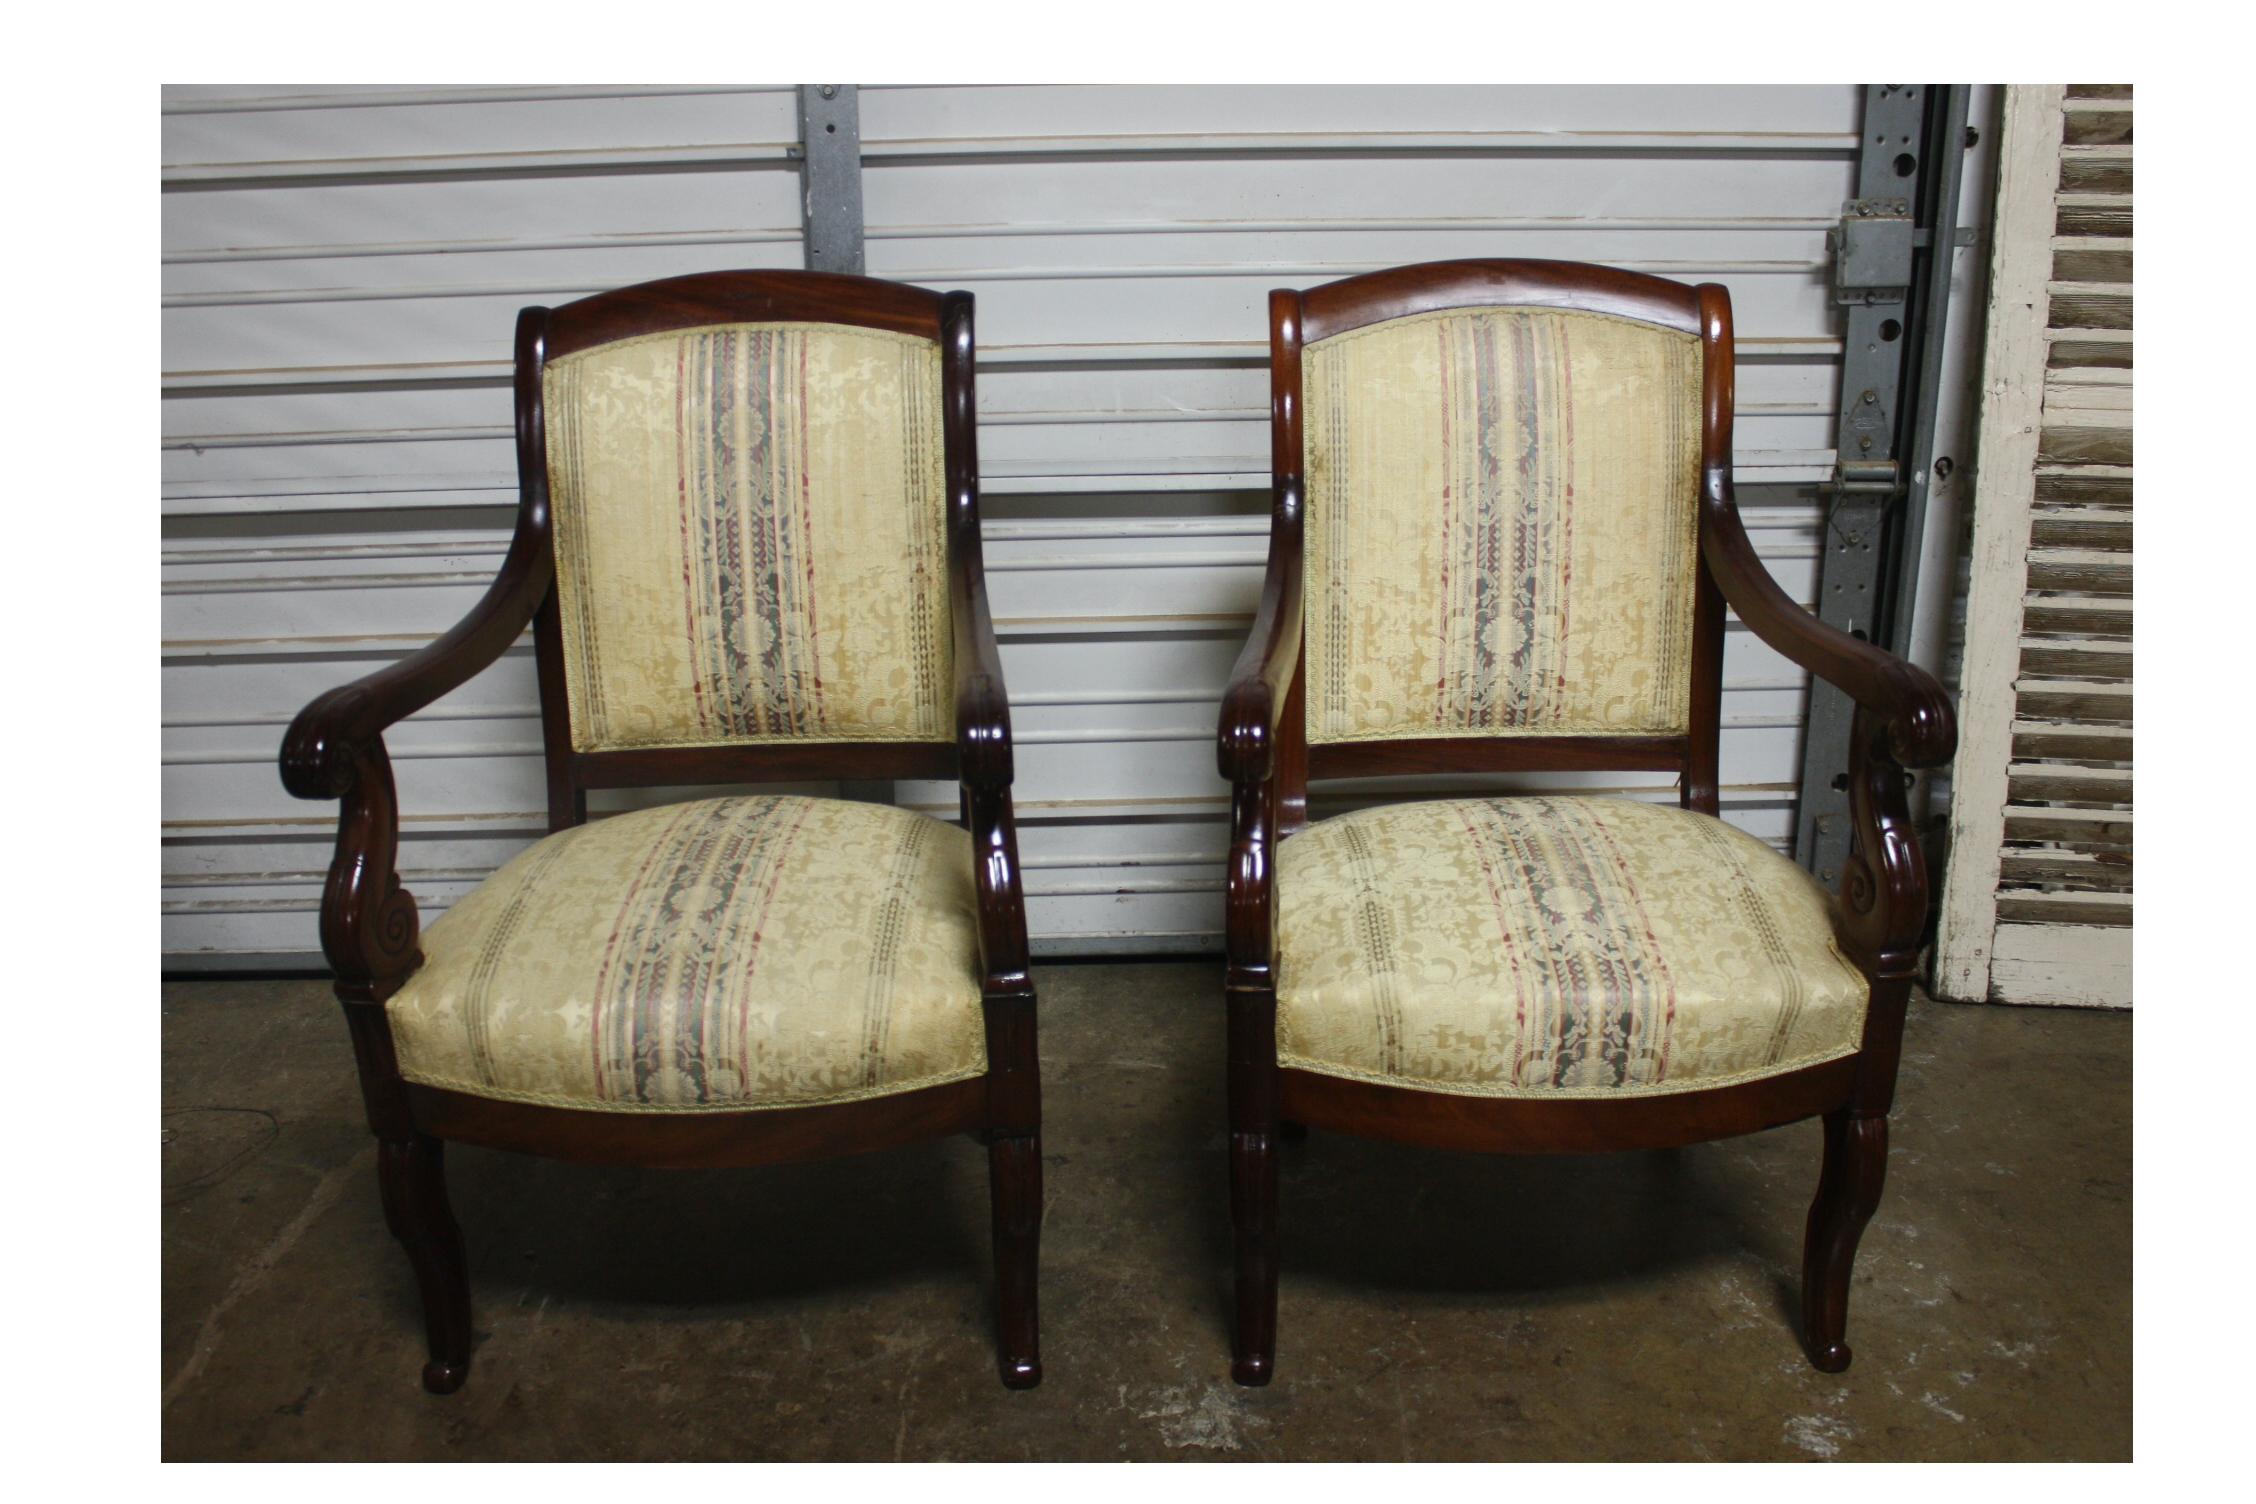 Those French chairs are made with mahogany wood, very comfortable, easy to place anywhere.